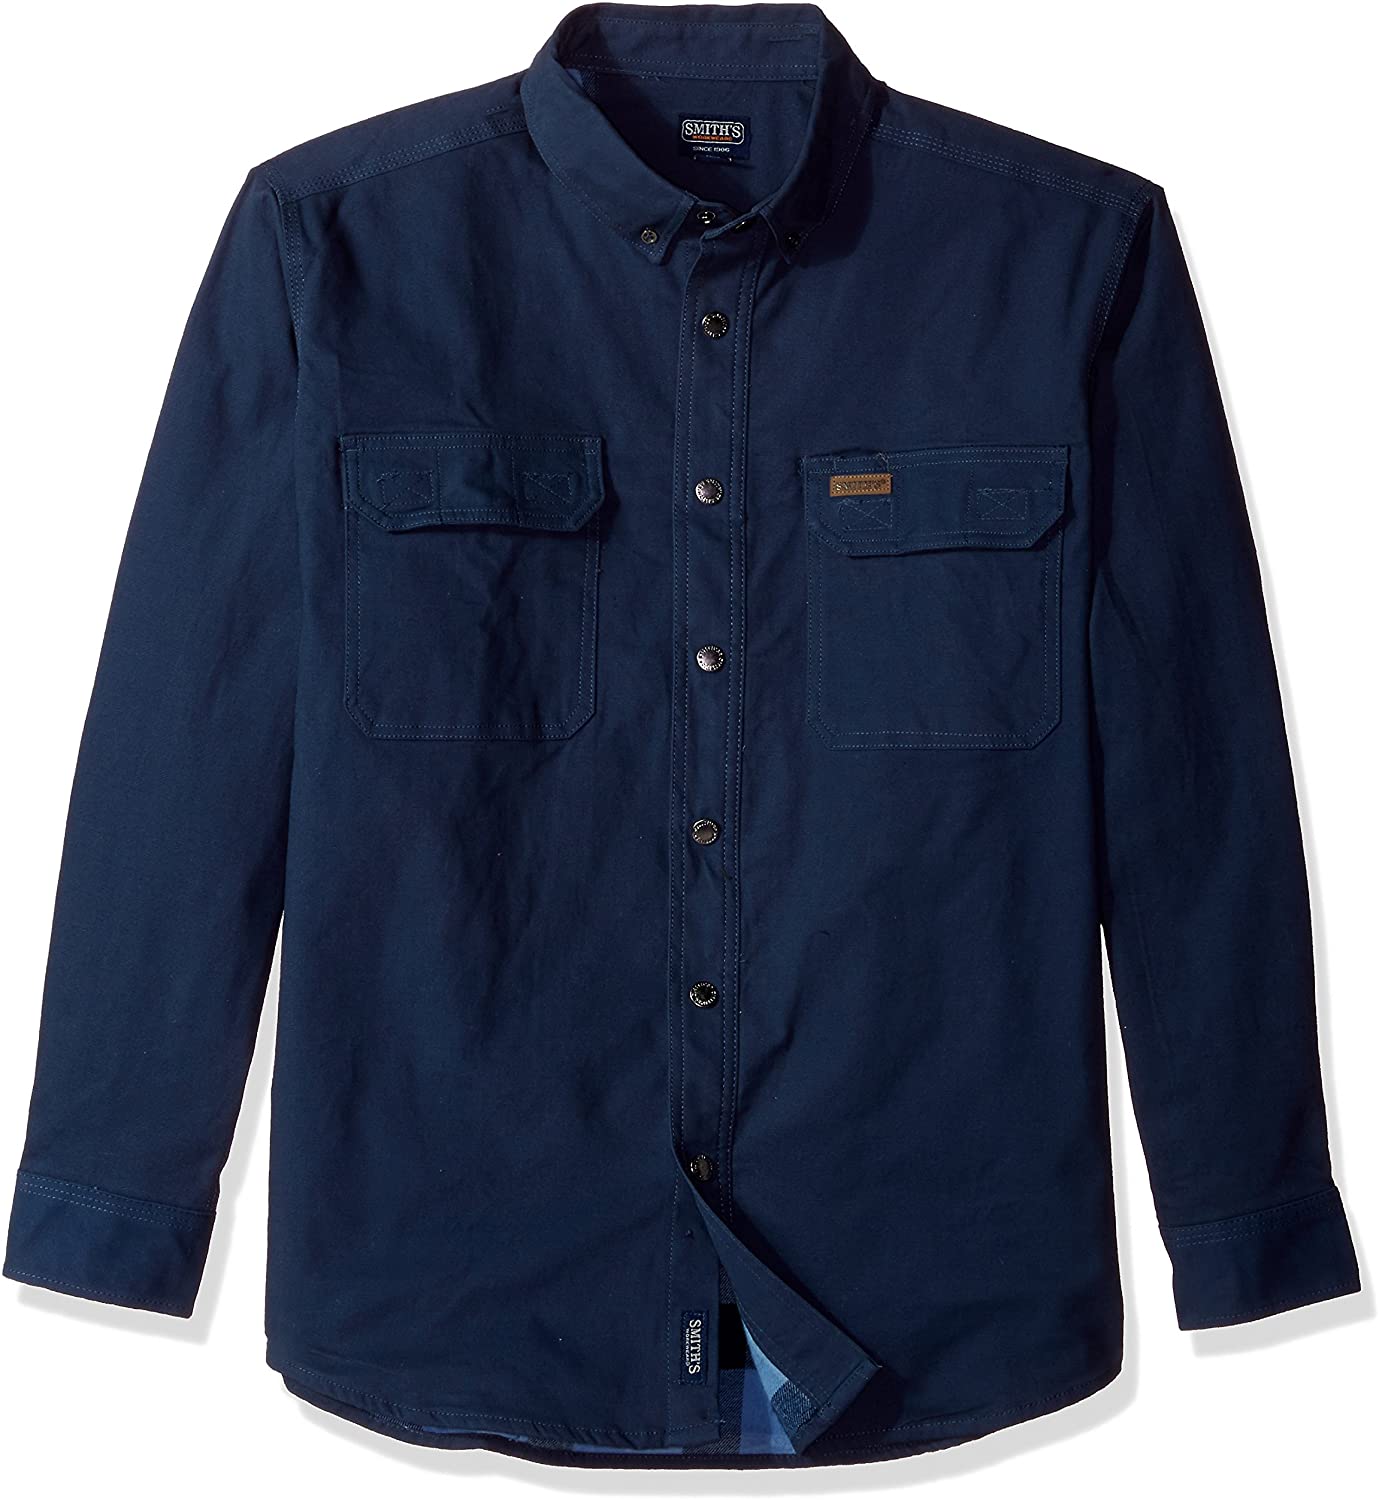 FLANNEL-LINED FULL-SWING SMITH'S-STRETCH WORK SHIRT